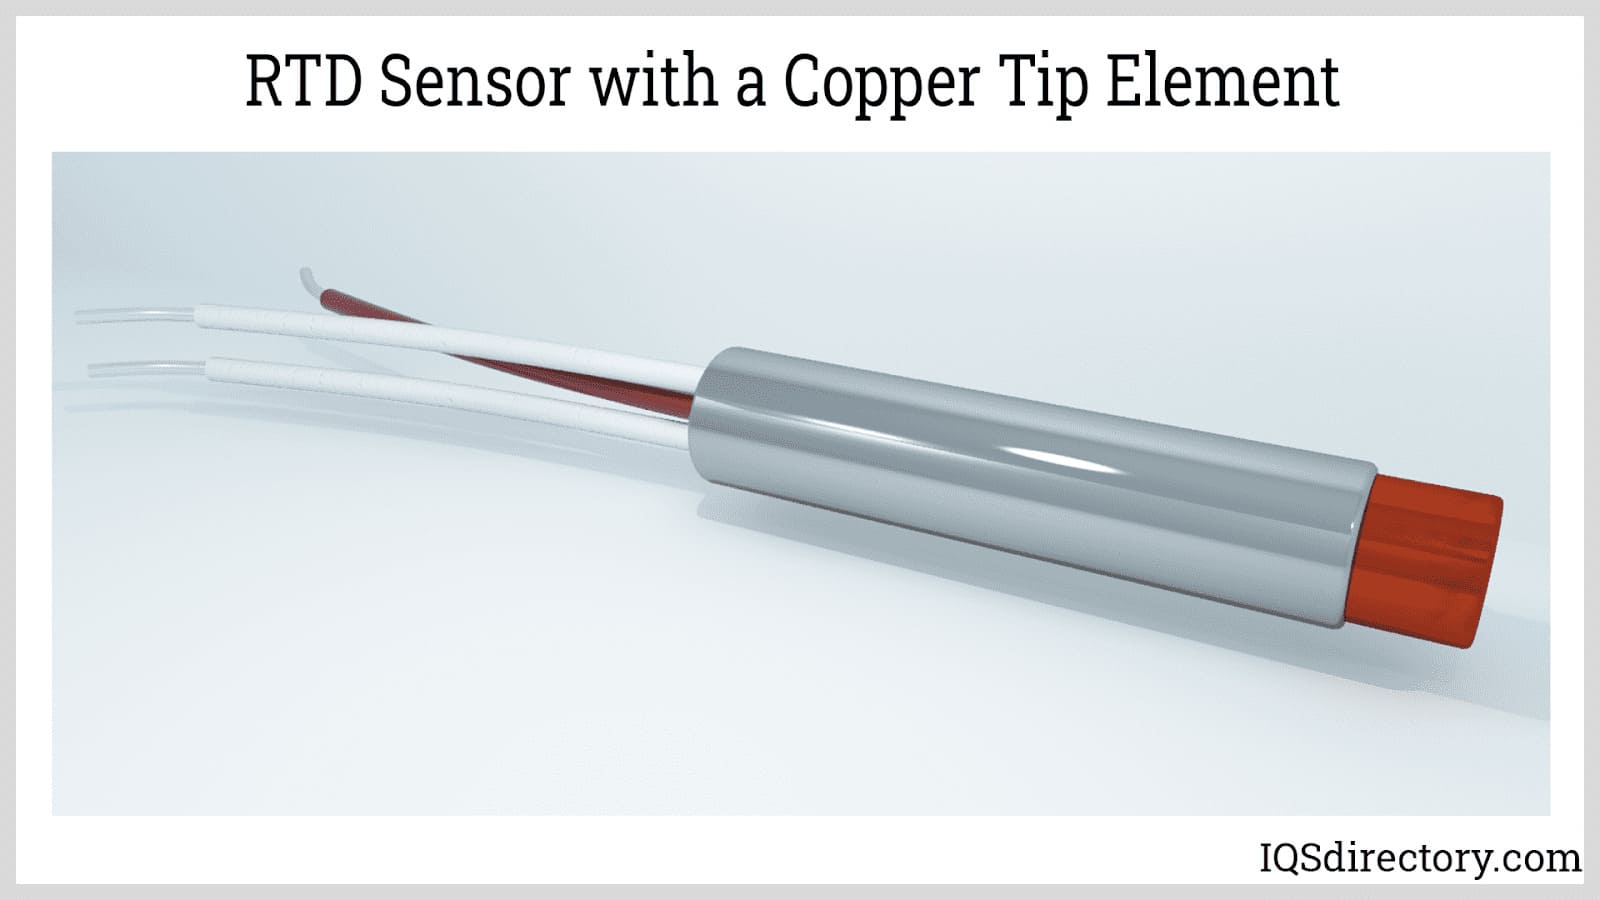 RTD Sensor with a Copper Tip Element